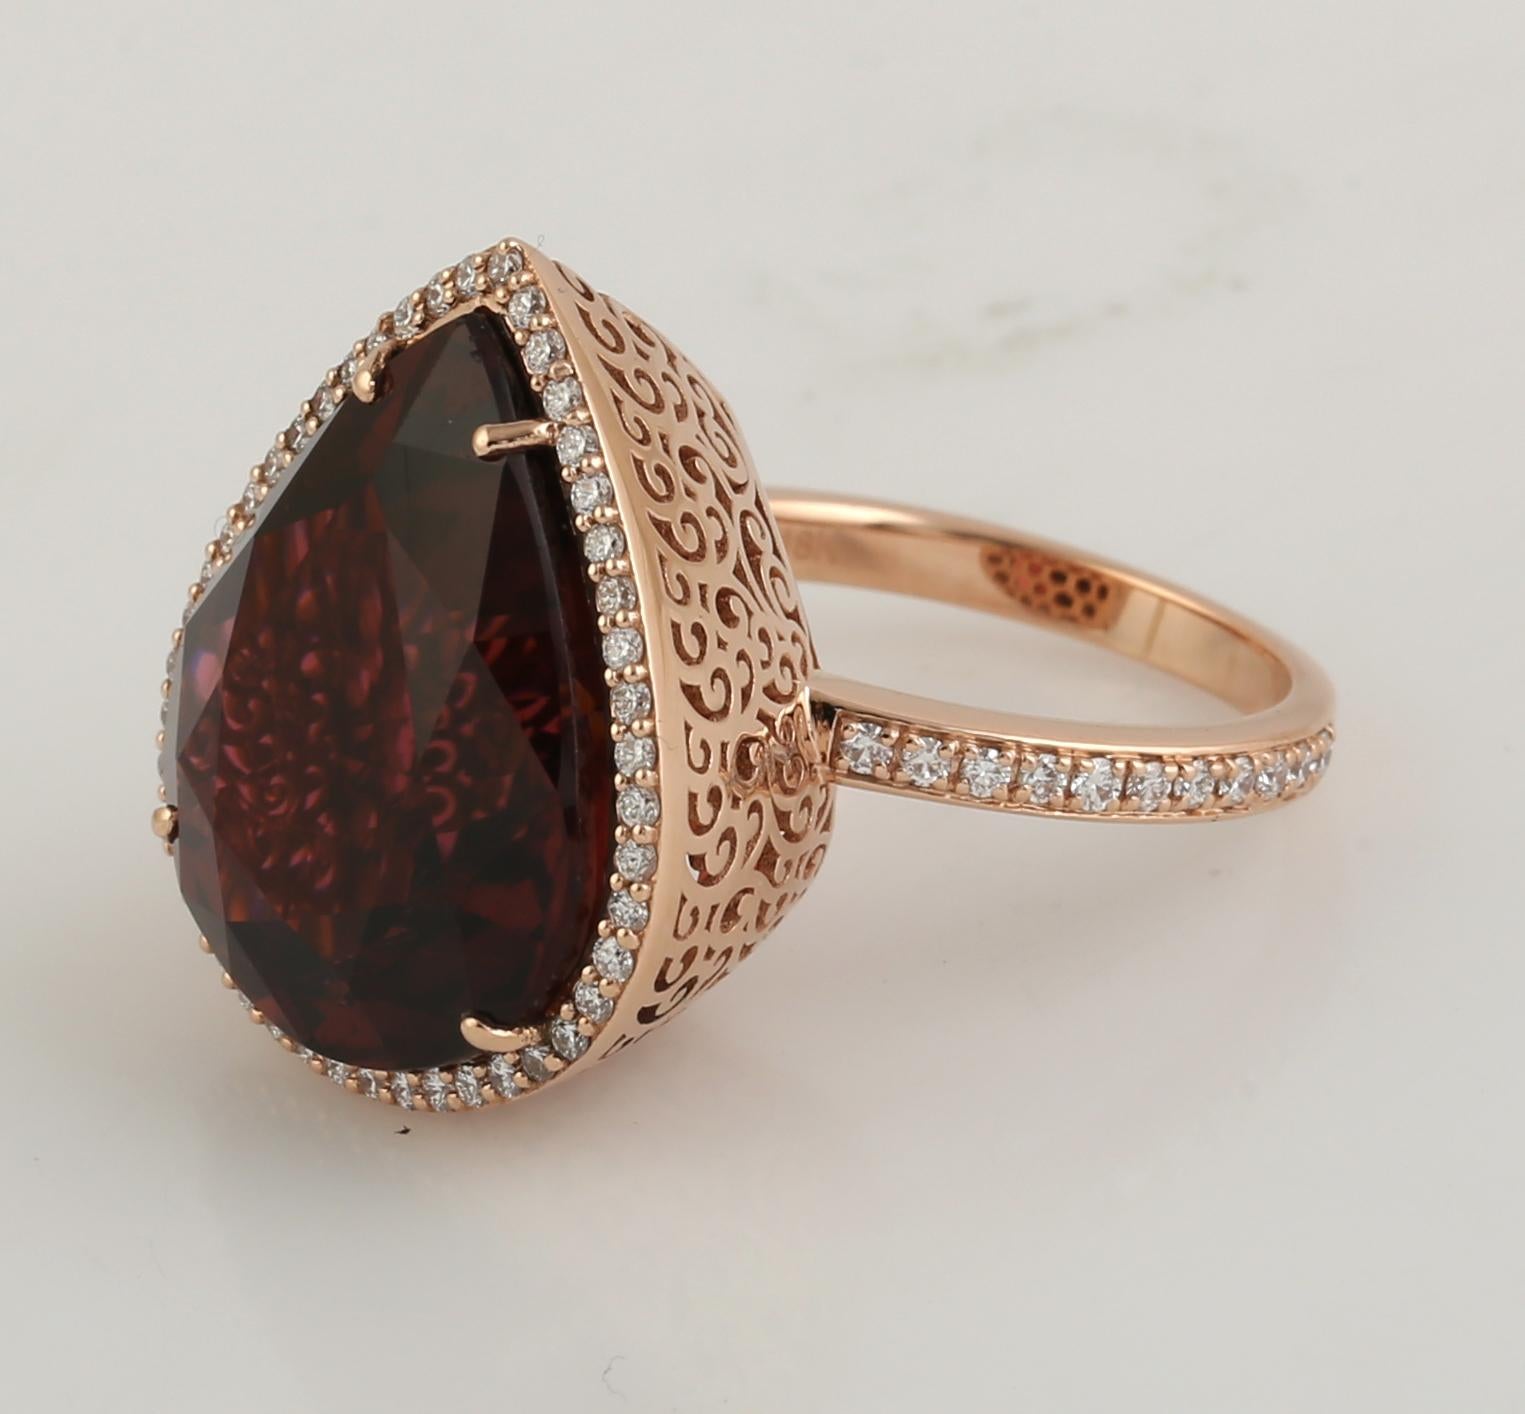 Contemporary 17.56 ct Tear Drop Tourmaline Cocktail Ring w/ Pave Diamonds In 18K Rose Gold For Sale